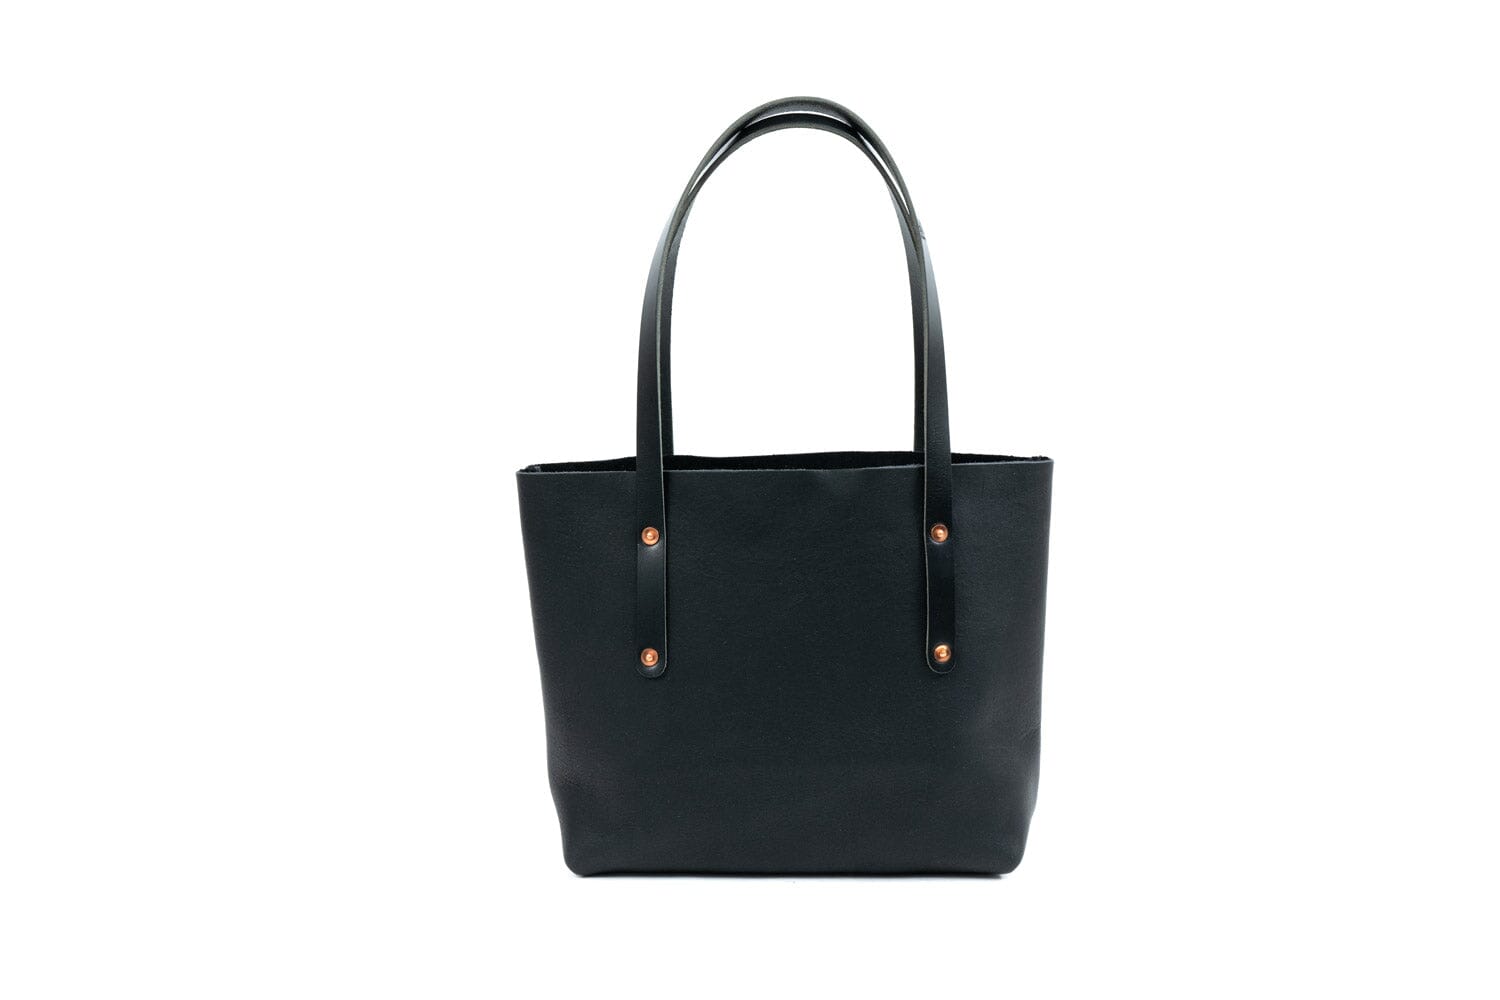 AVERY LEATHER TOTE BAG - SMALL - BLACK